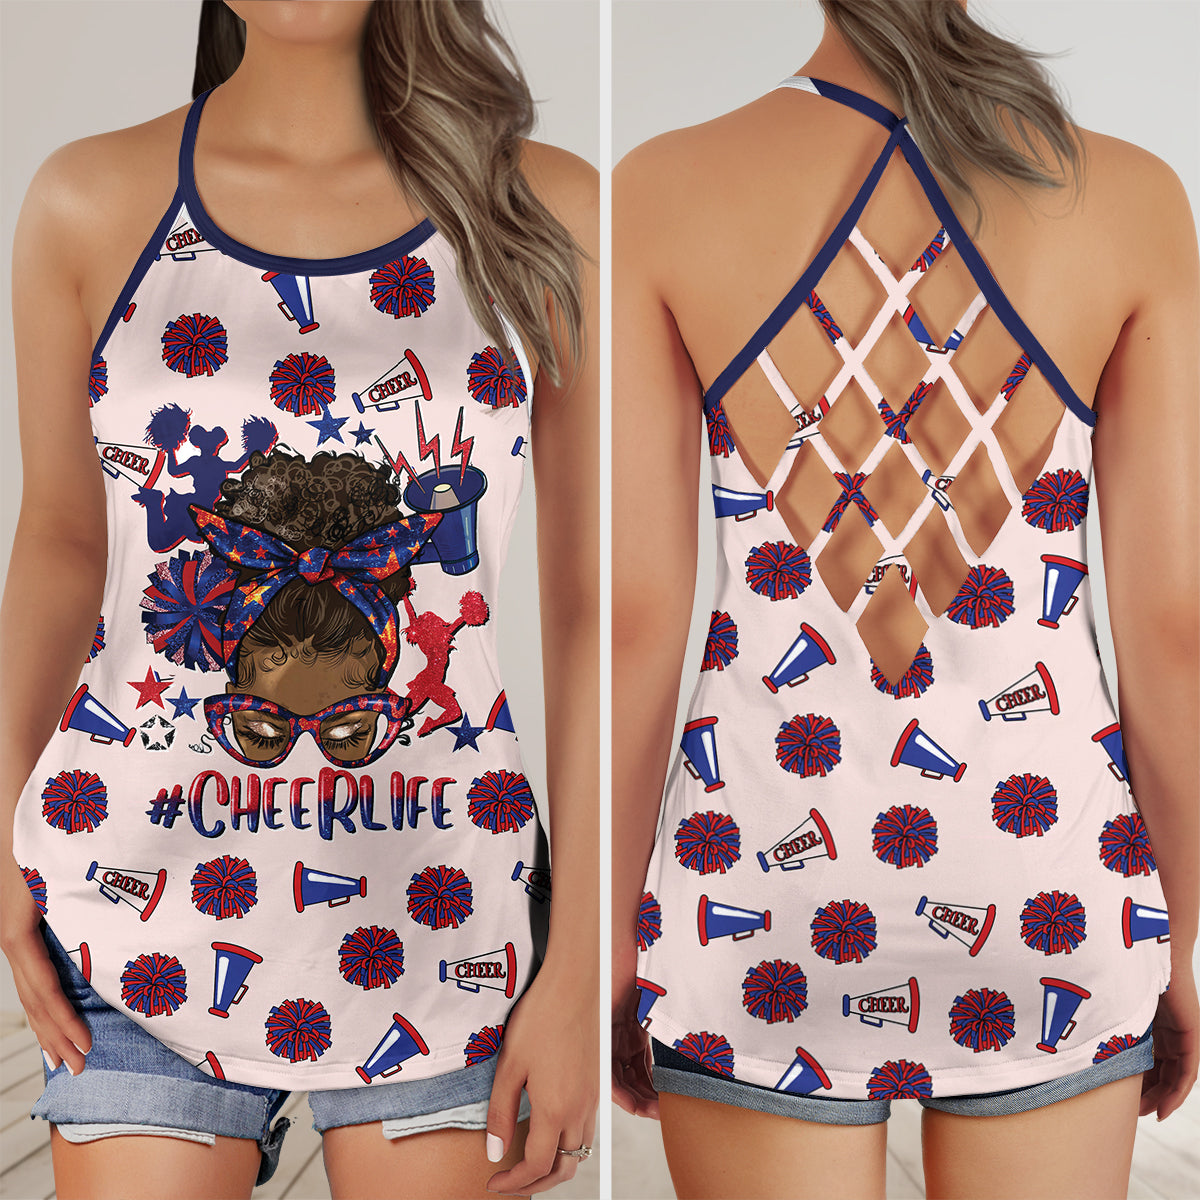 Afro messy bun cheer life blue and red Criss Cross Open Back Tank Top